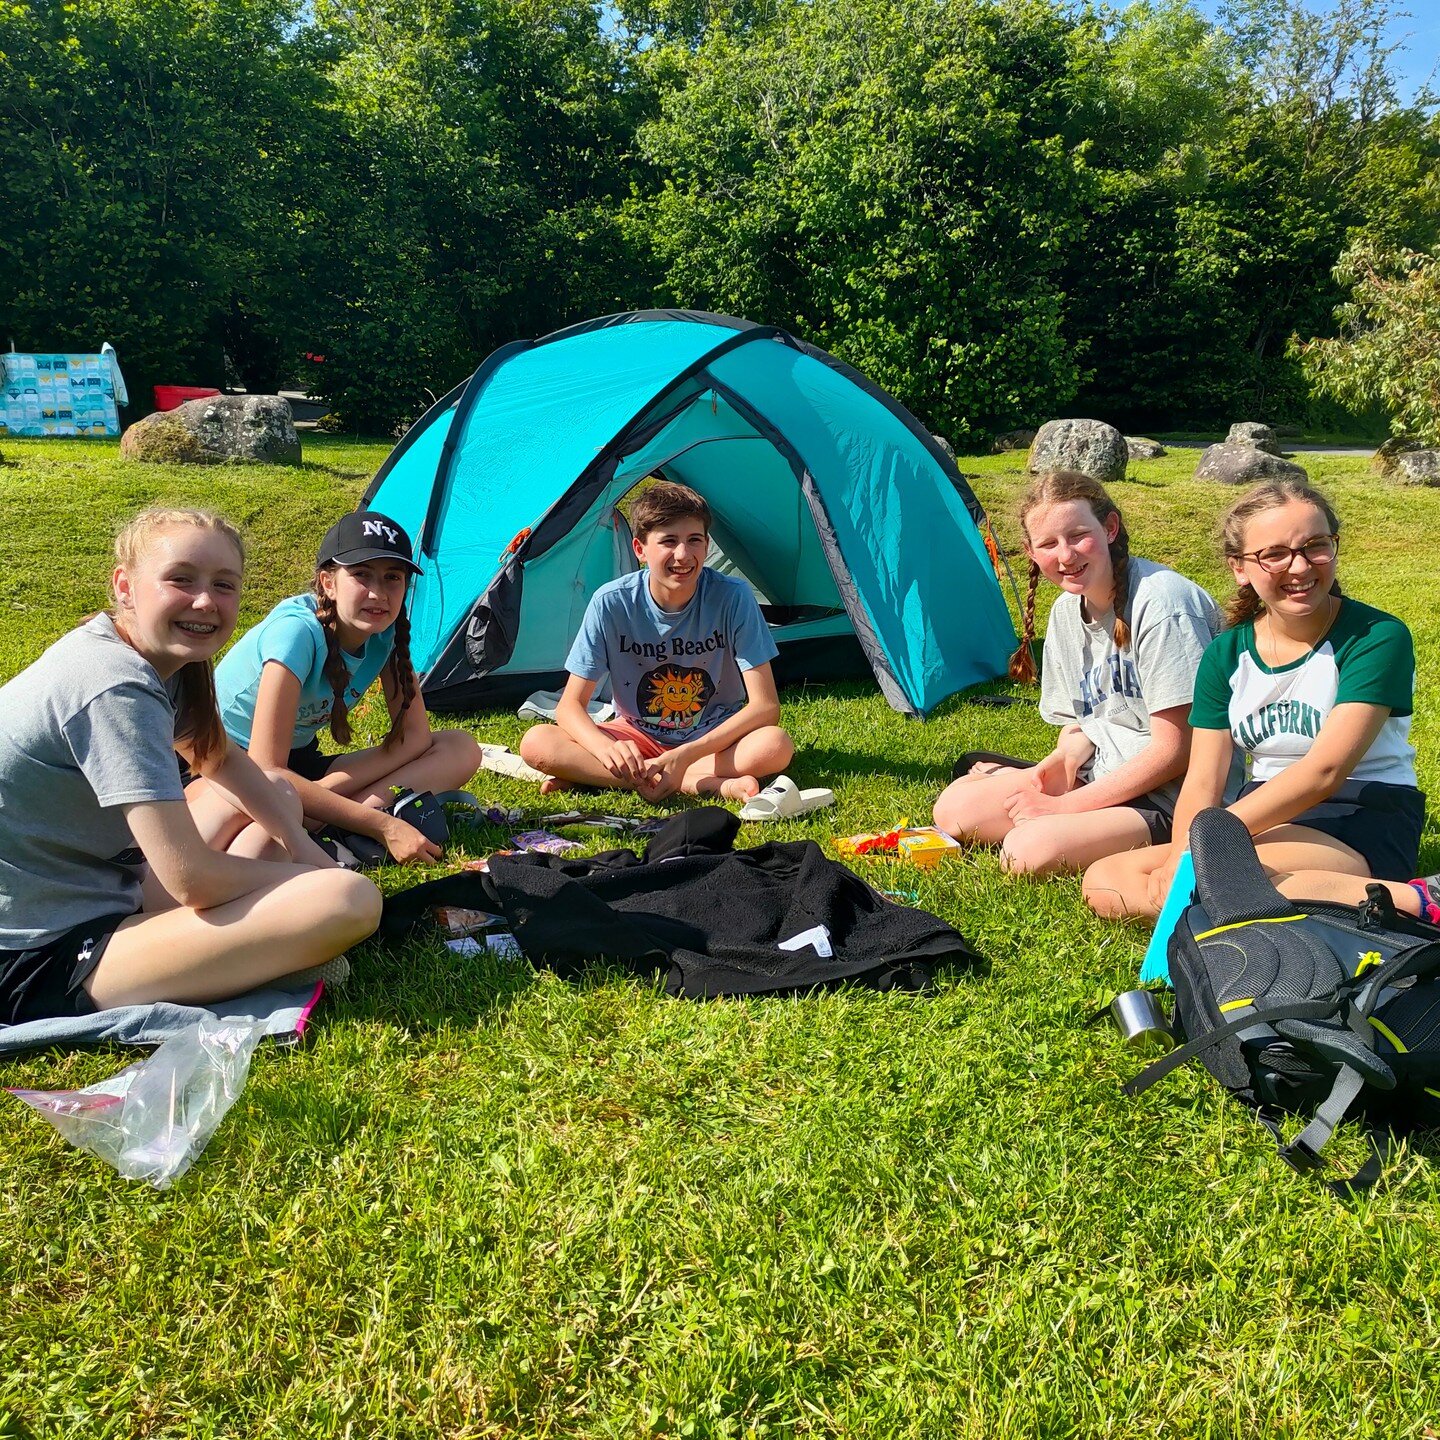 Week 3 of the Year 8 Leavers' Programme- camping in a beautiful Welsh national park. 

#itsastneotsthing #snyr8 #camping #leavers2022